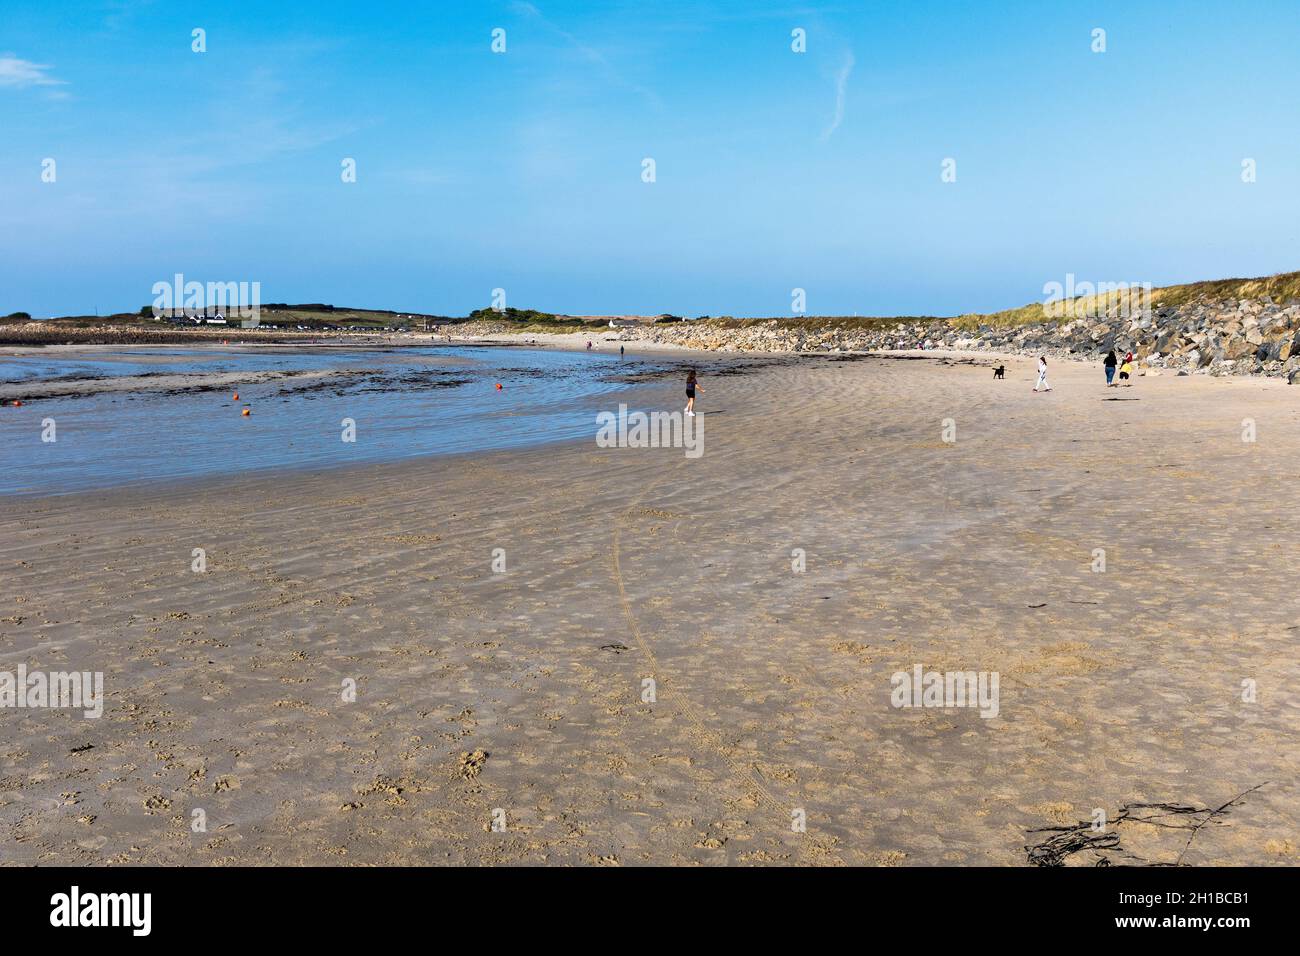 dh Ladies Bay VALE GUERNSEY persone sulle spiagge le Grand Havre spiaggia Foto Stock